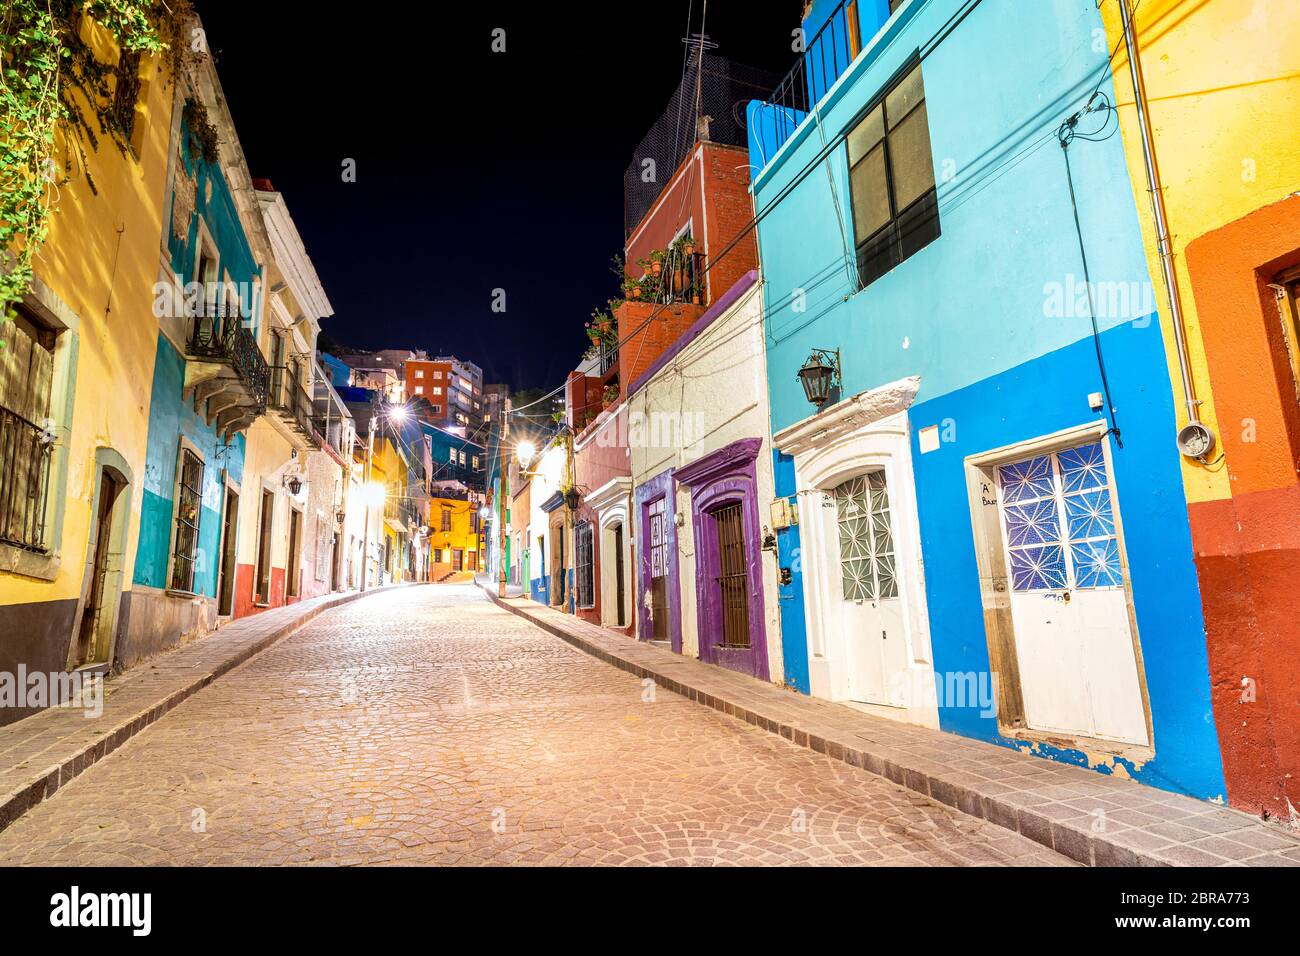 A colorful street in the city of Guanajuato, Mexico. Stock Photo